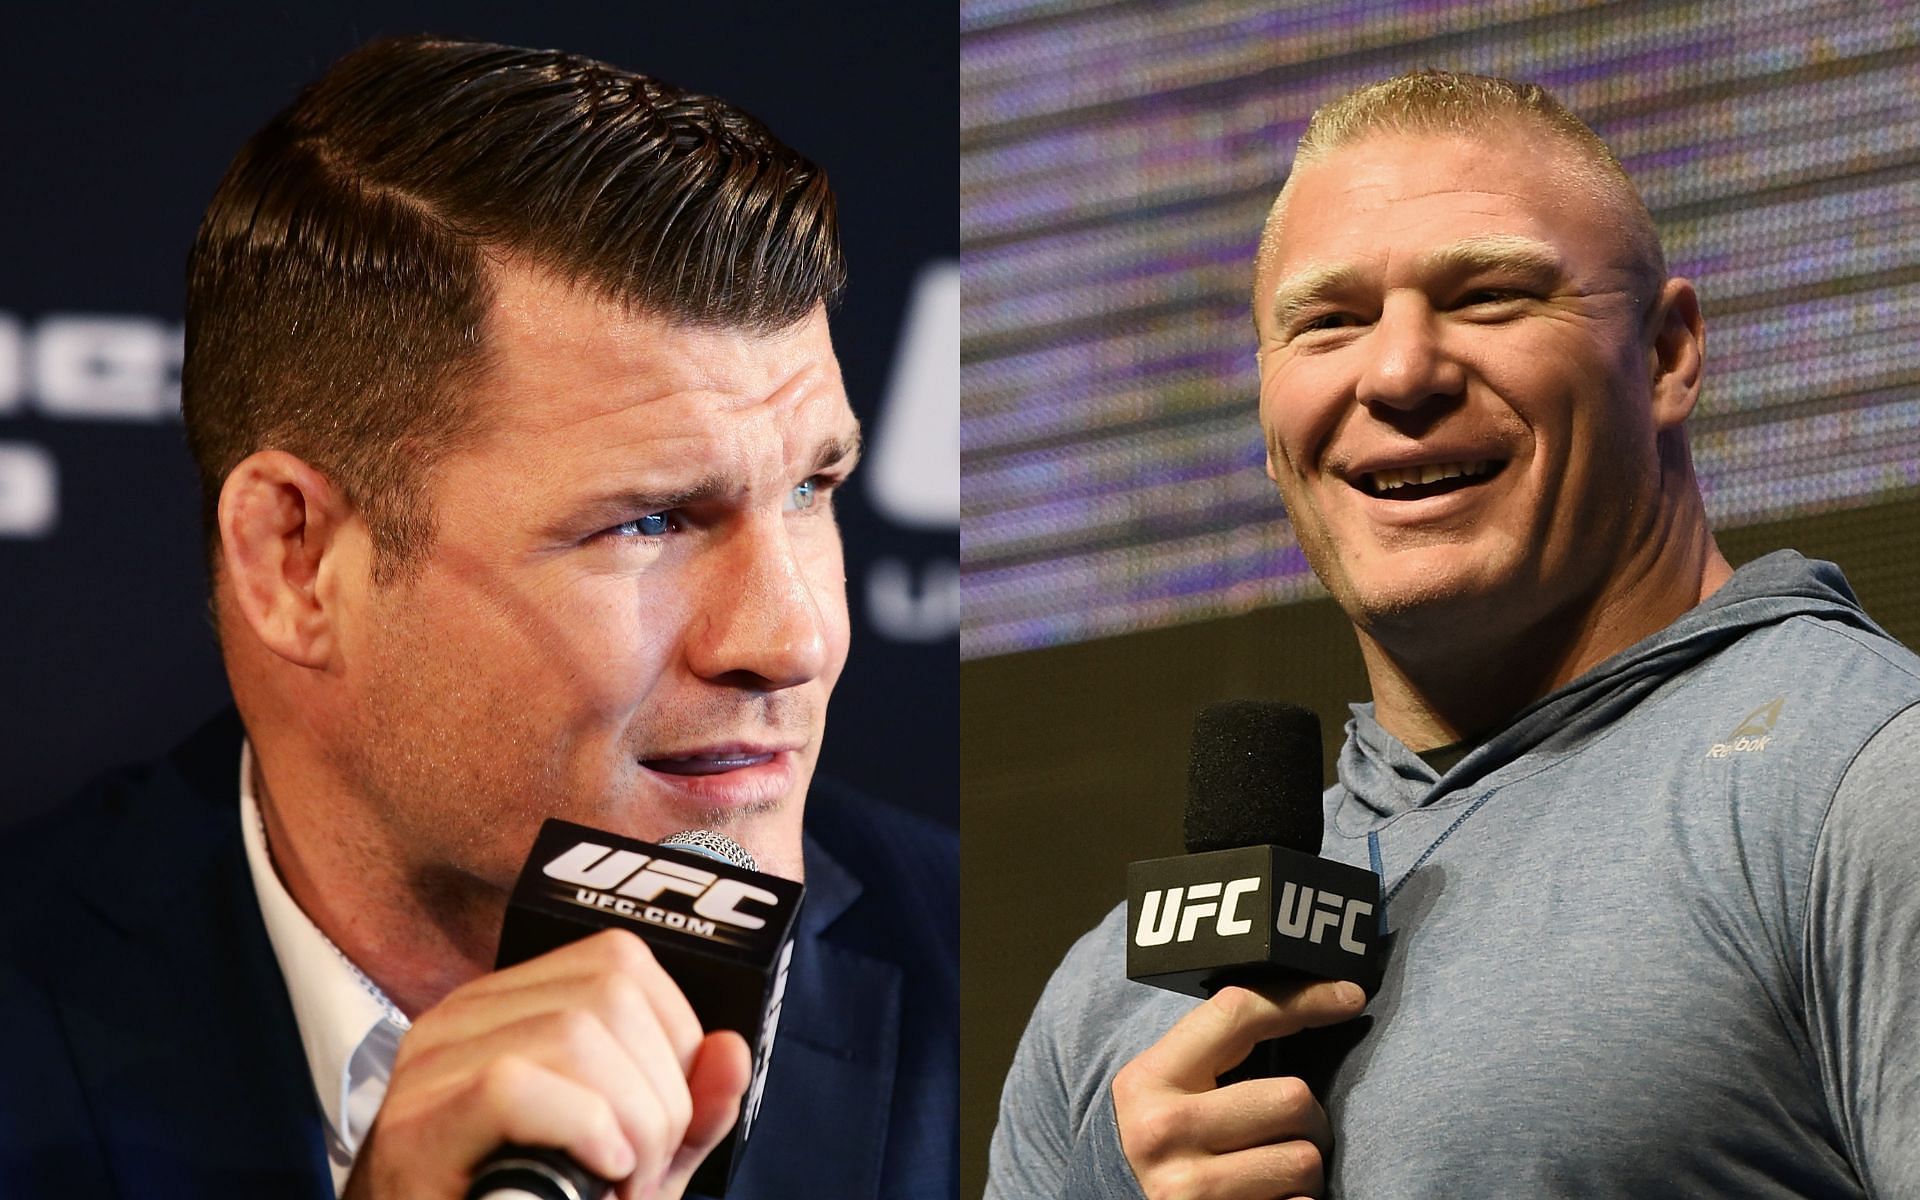 Michael Bisping (left) added Brock Lesnar (right) on his list of top 10 trash-talkers in the UFC